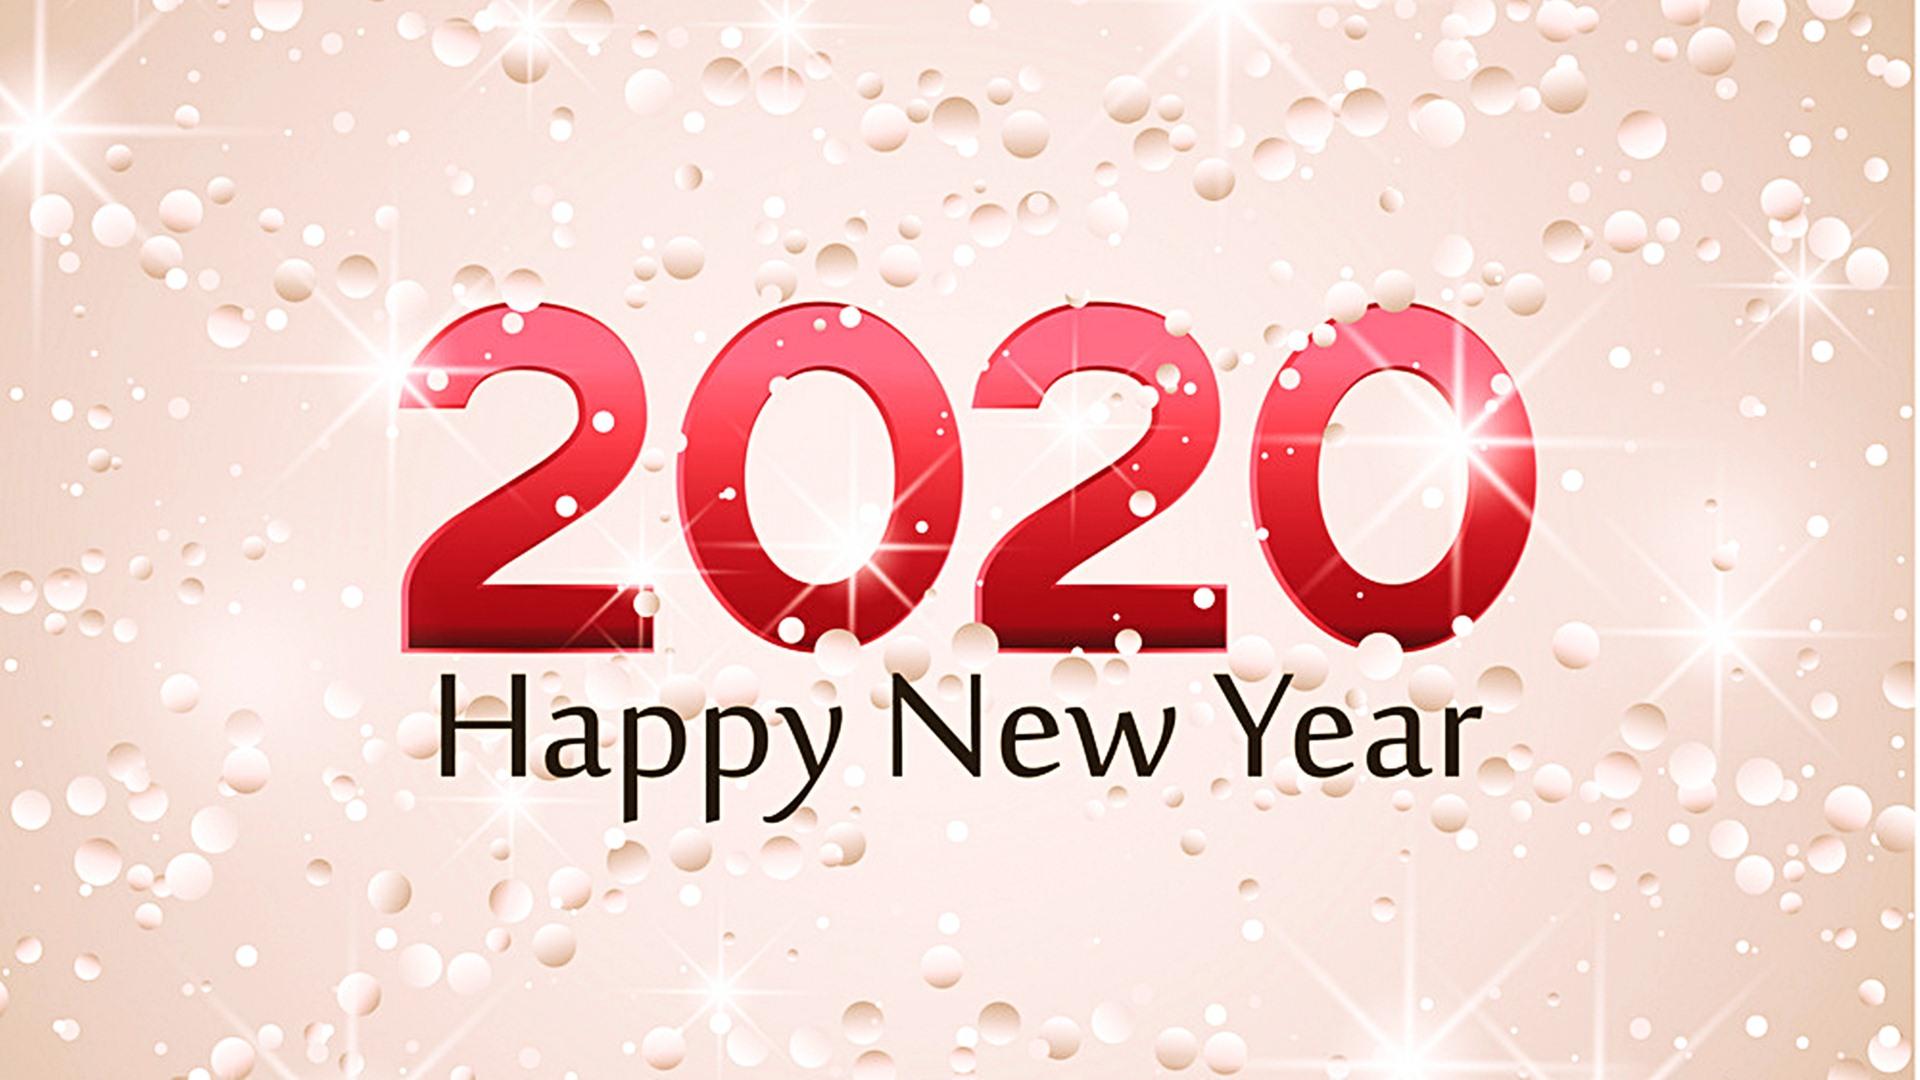 Happy New Year 2020 Wishes Message Quotes Wallapers GIFs